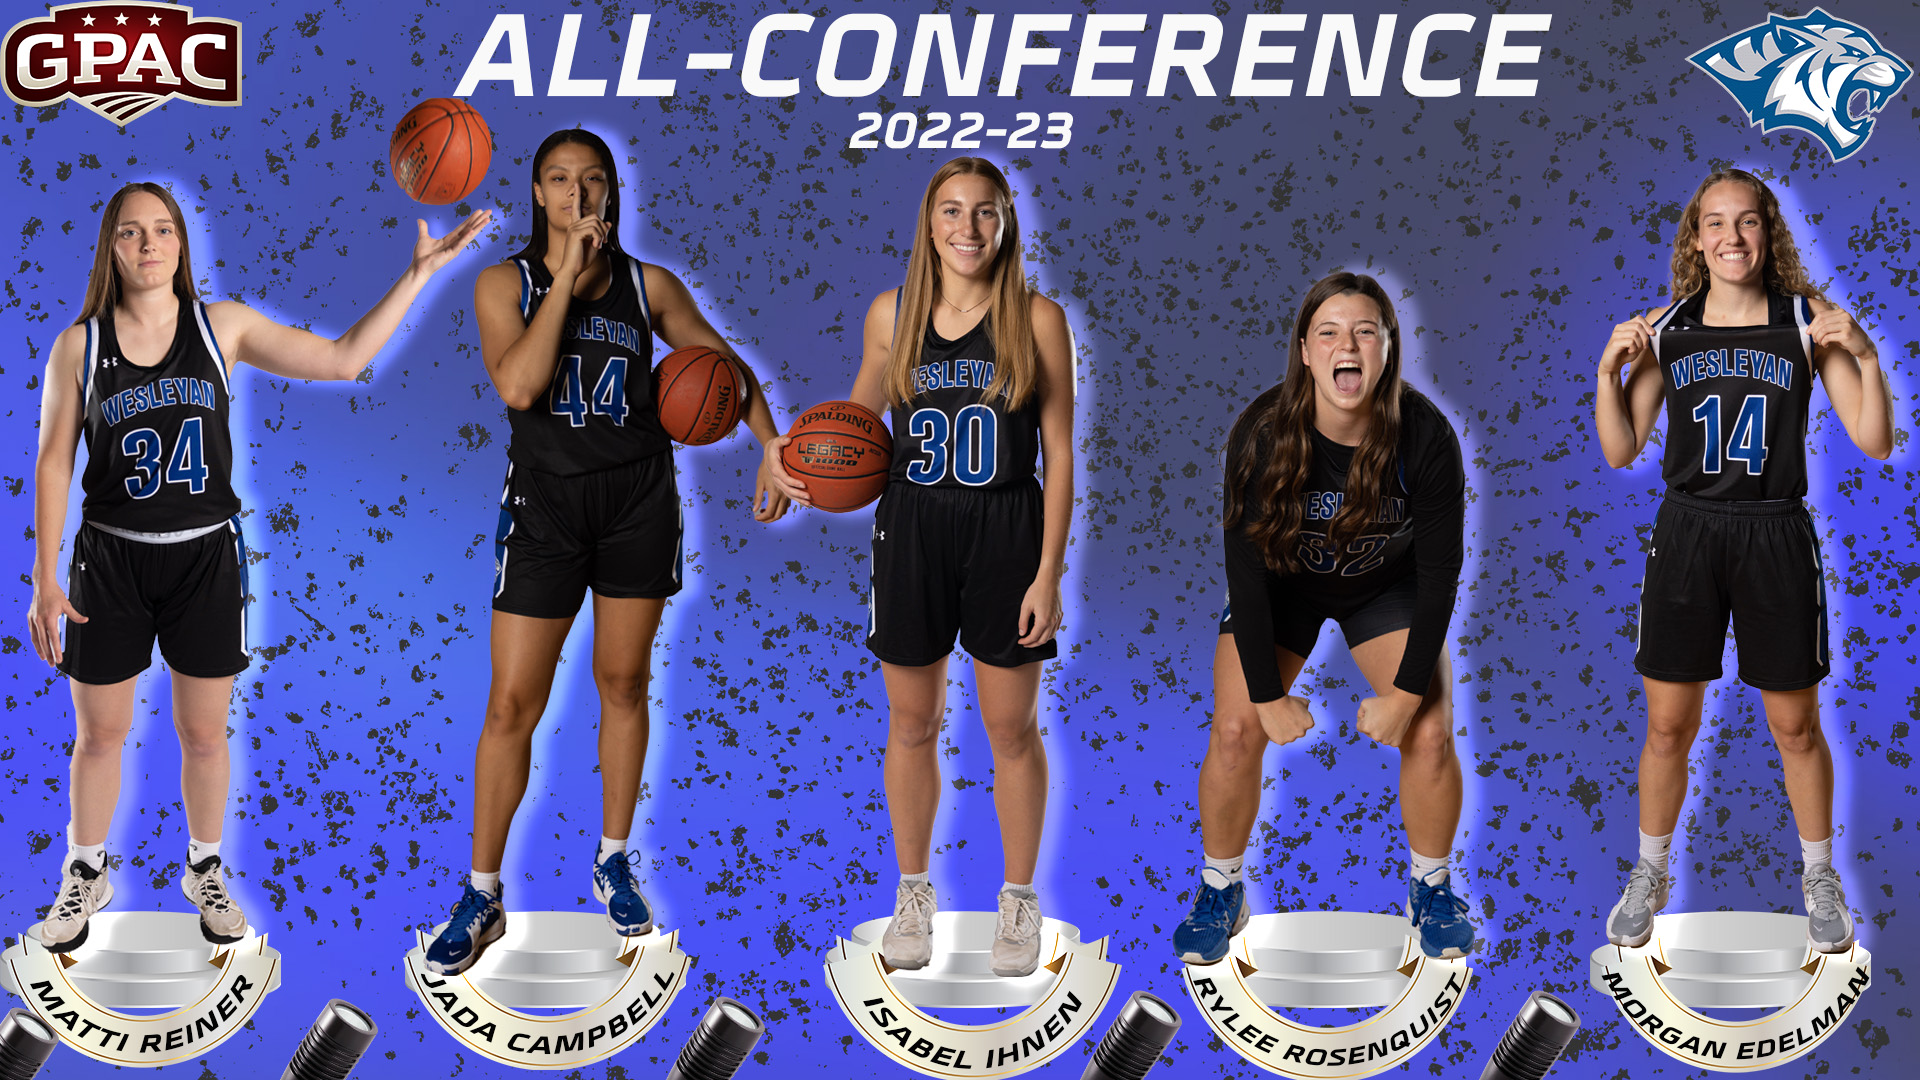 FIVE TIGER WOMEN'S BASKETBALL PLAYERS EARN GPAC ALL-CONFERENCE HONORS